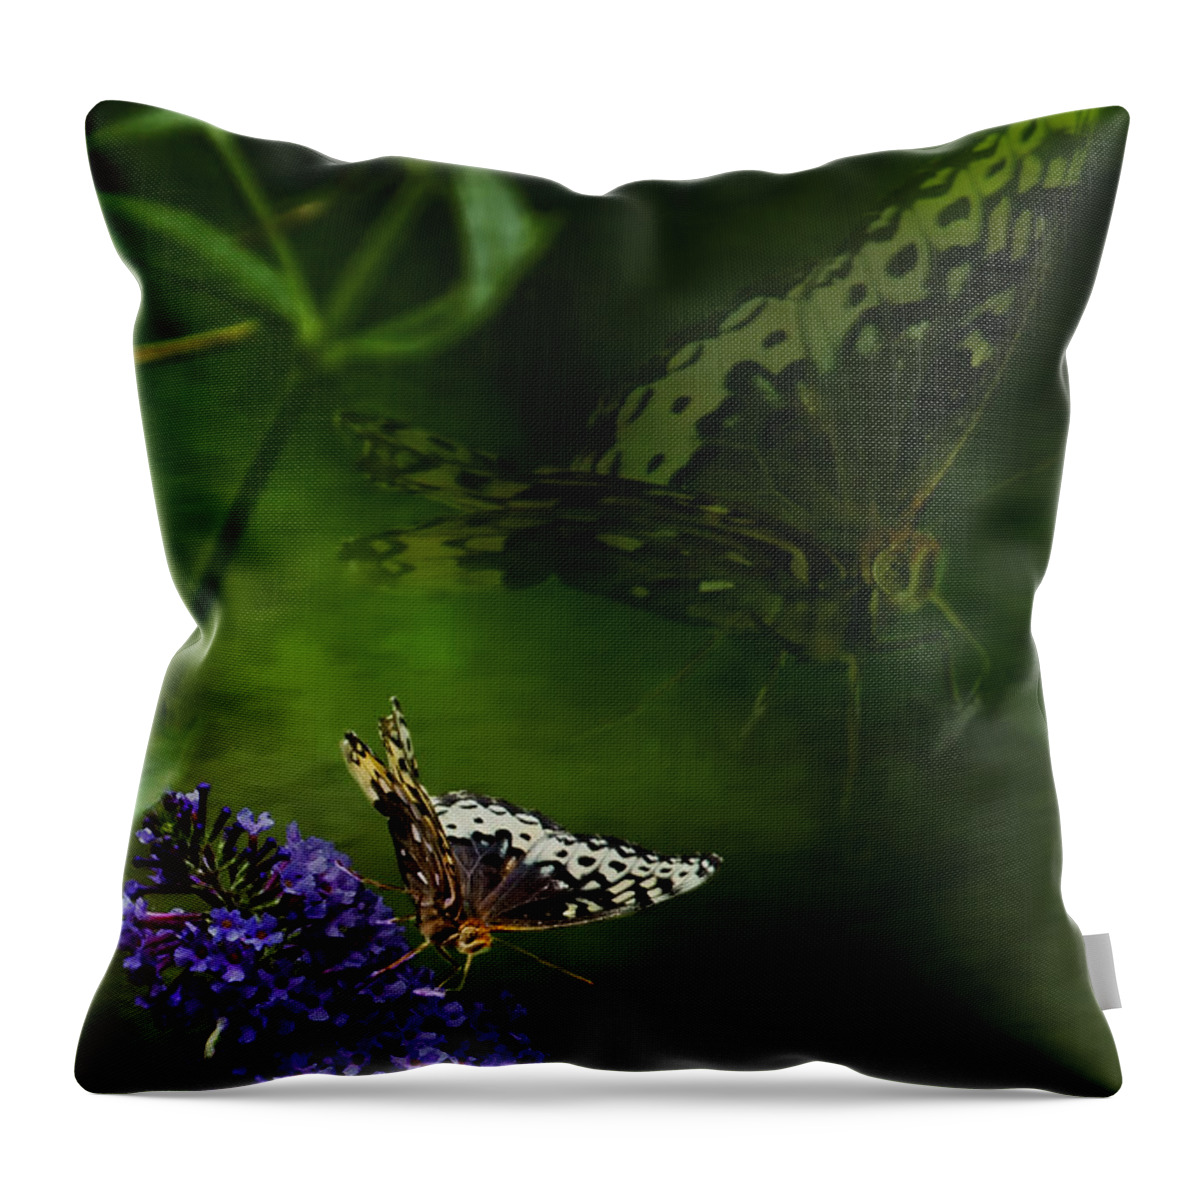 Butterfly Throw Pillow featuring the photograph The Psyche by Belinda Greb